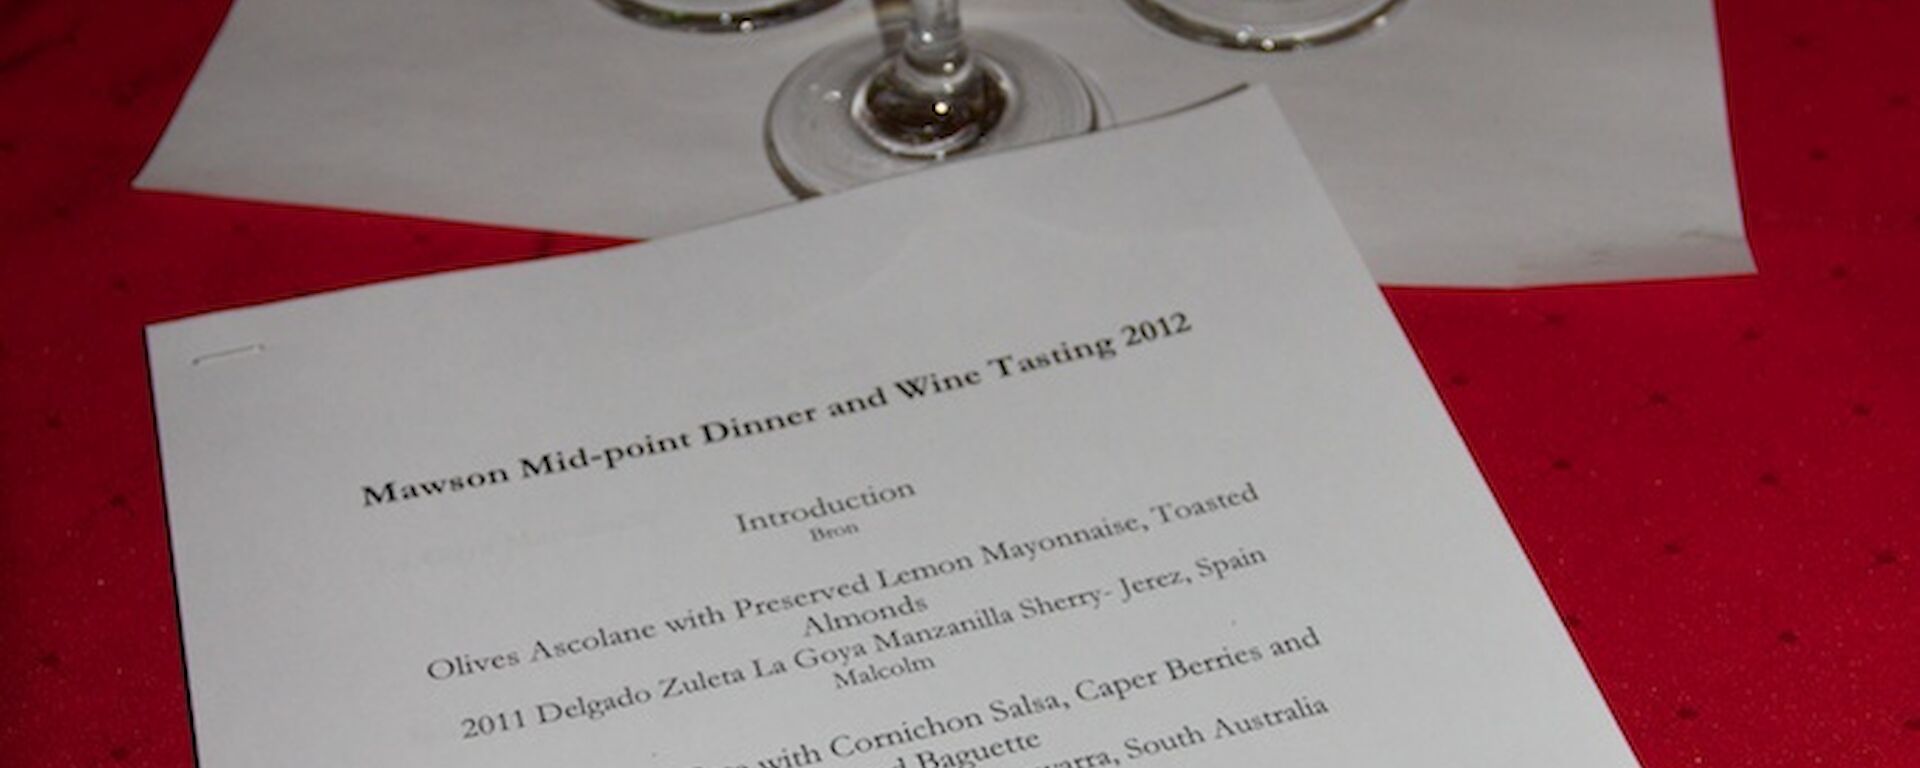 Five glasses of wine arranged for tasting with a menu lying in front of them on a dinner table